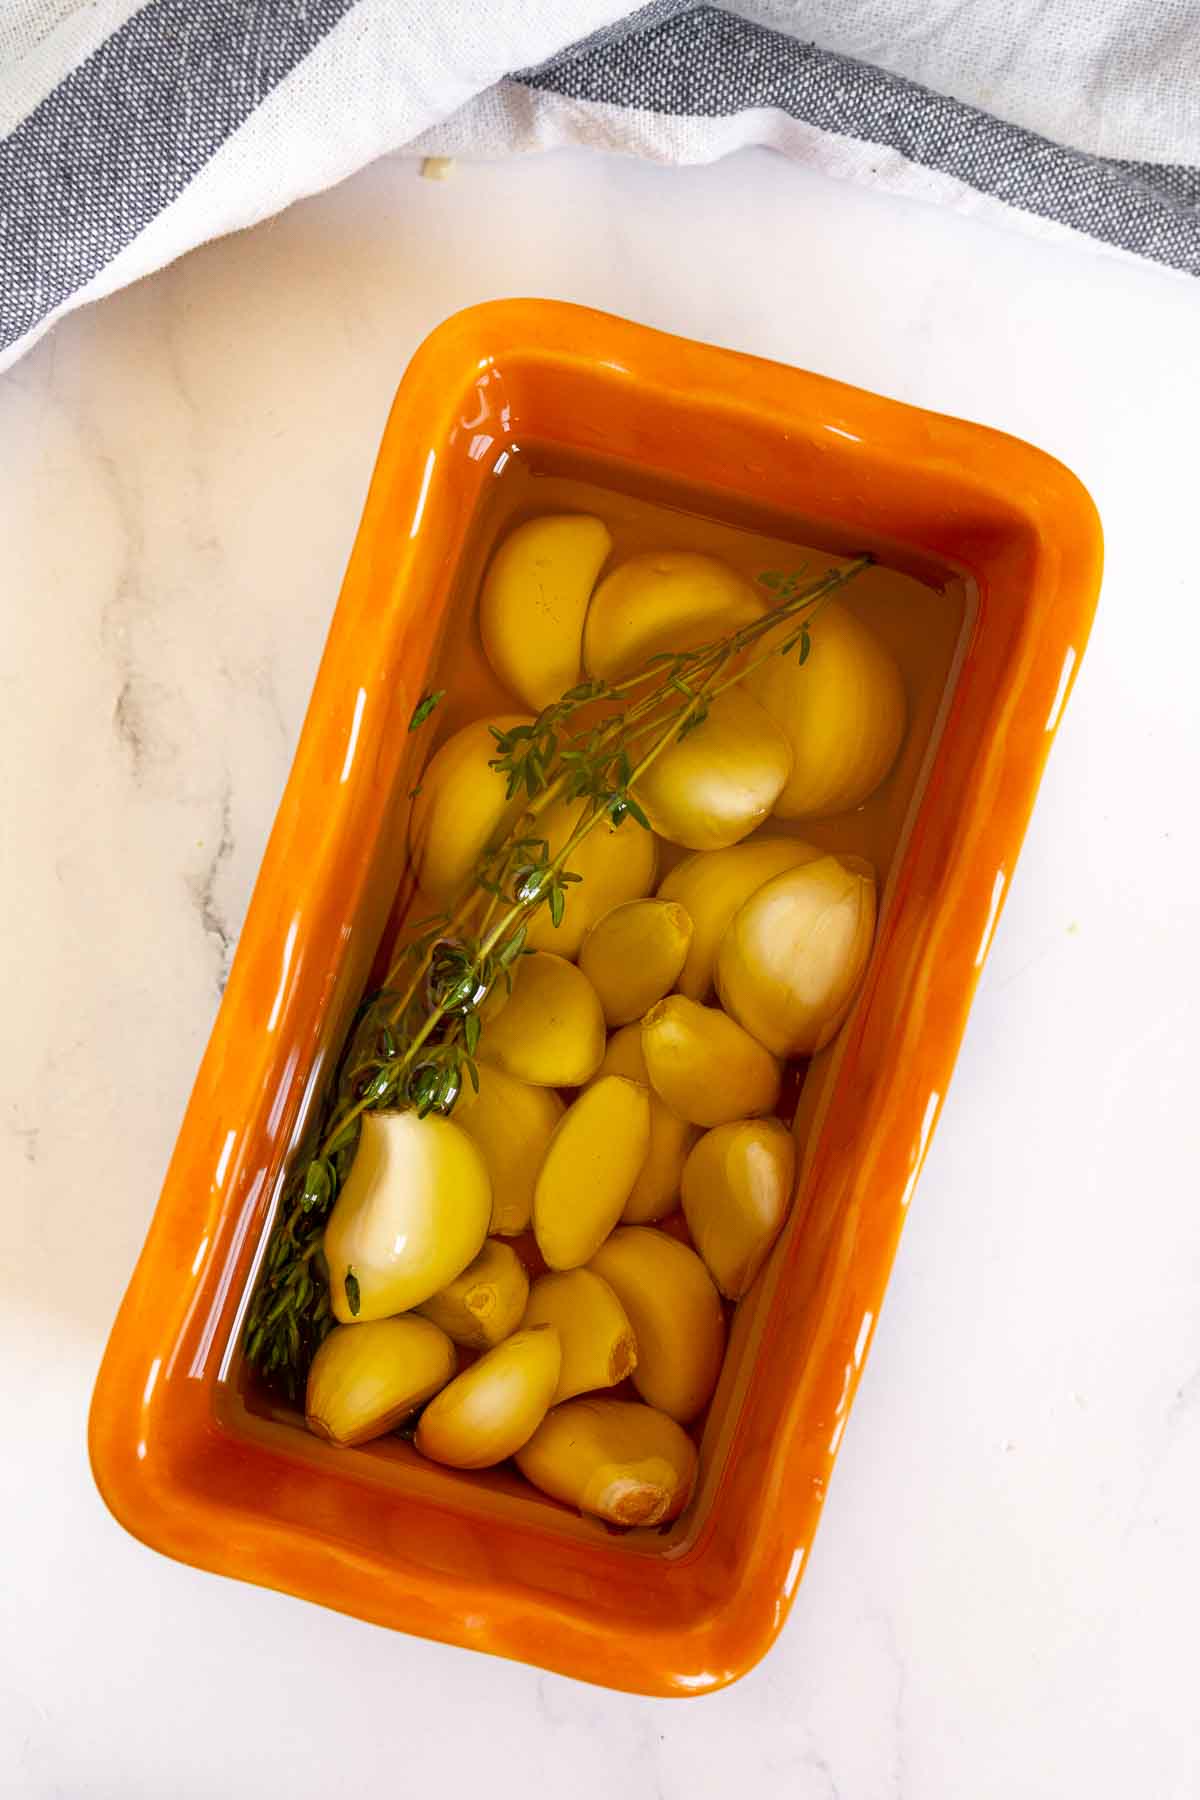 Garlic cloves, olive oil, and a thyme sprig in a small oven-safe container